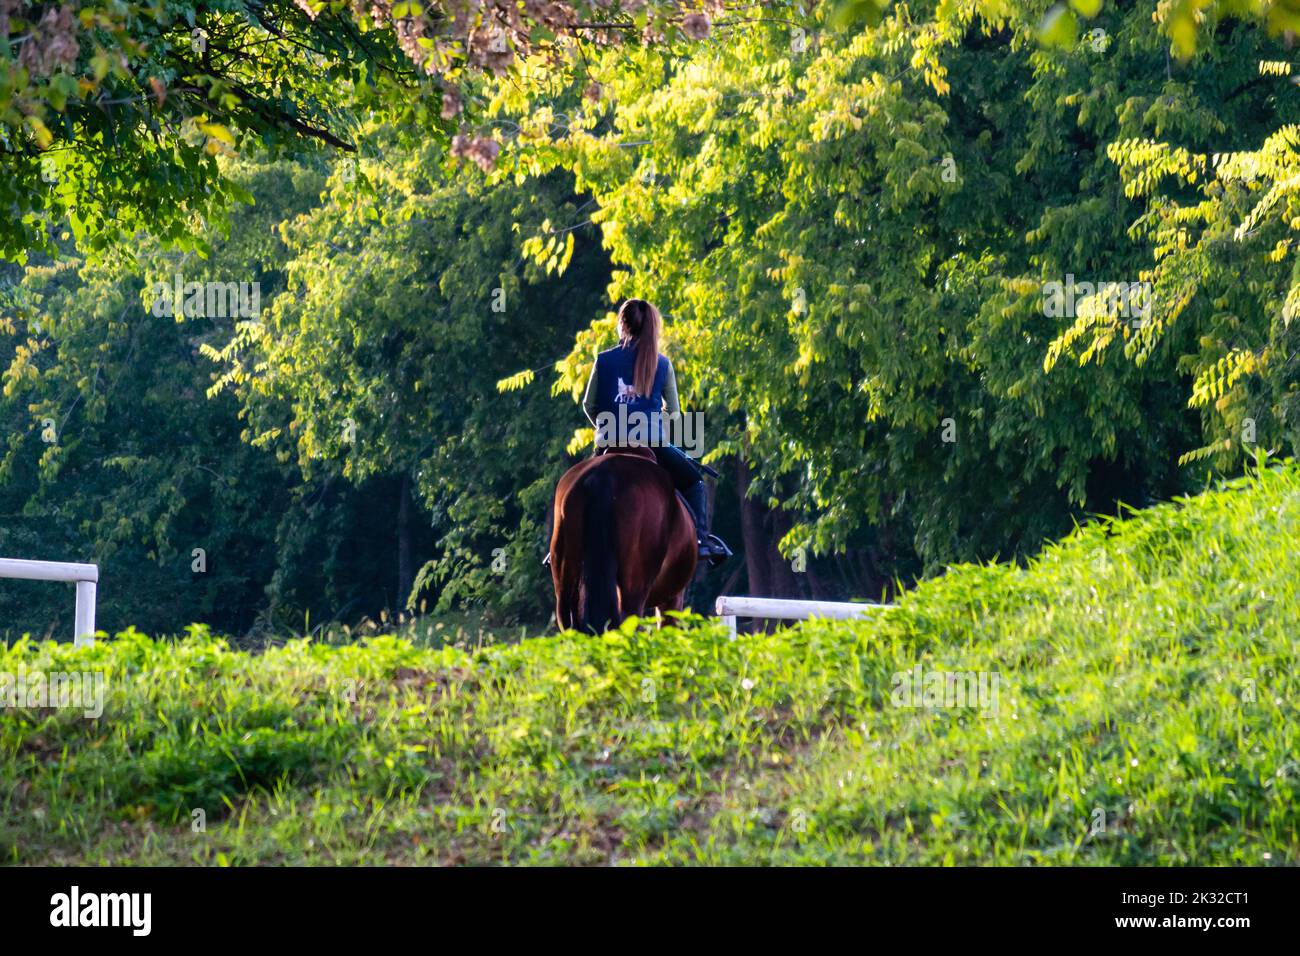 Sporty female rider on a horse. Sporty female rider on a horse, illuminated by the afternoon sun. Stock Photo